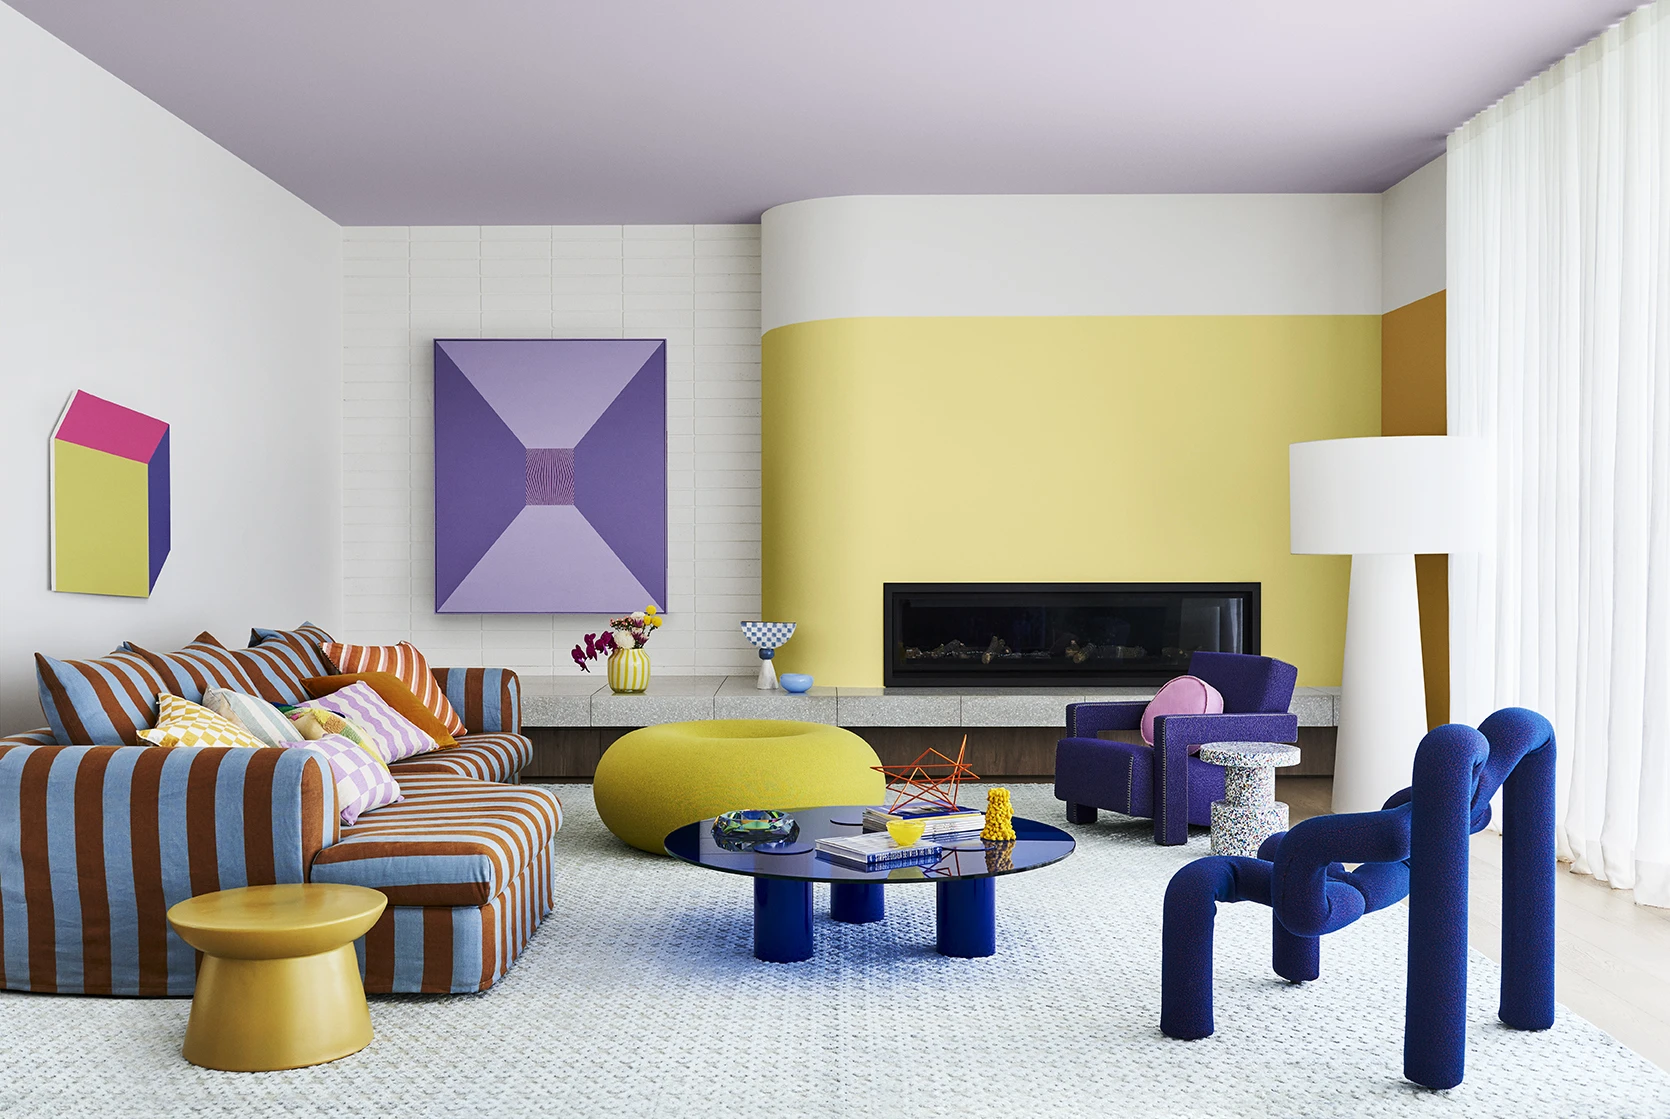 White and yellow living room with purple artwork and modern furniture.